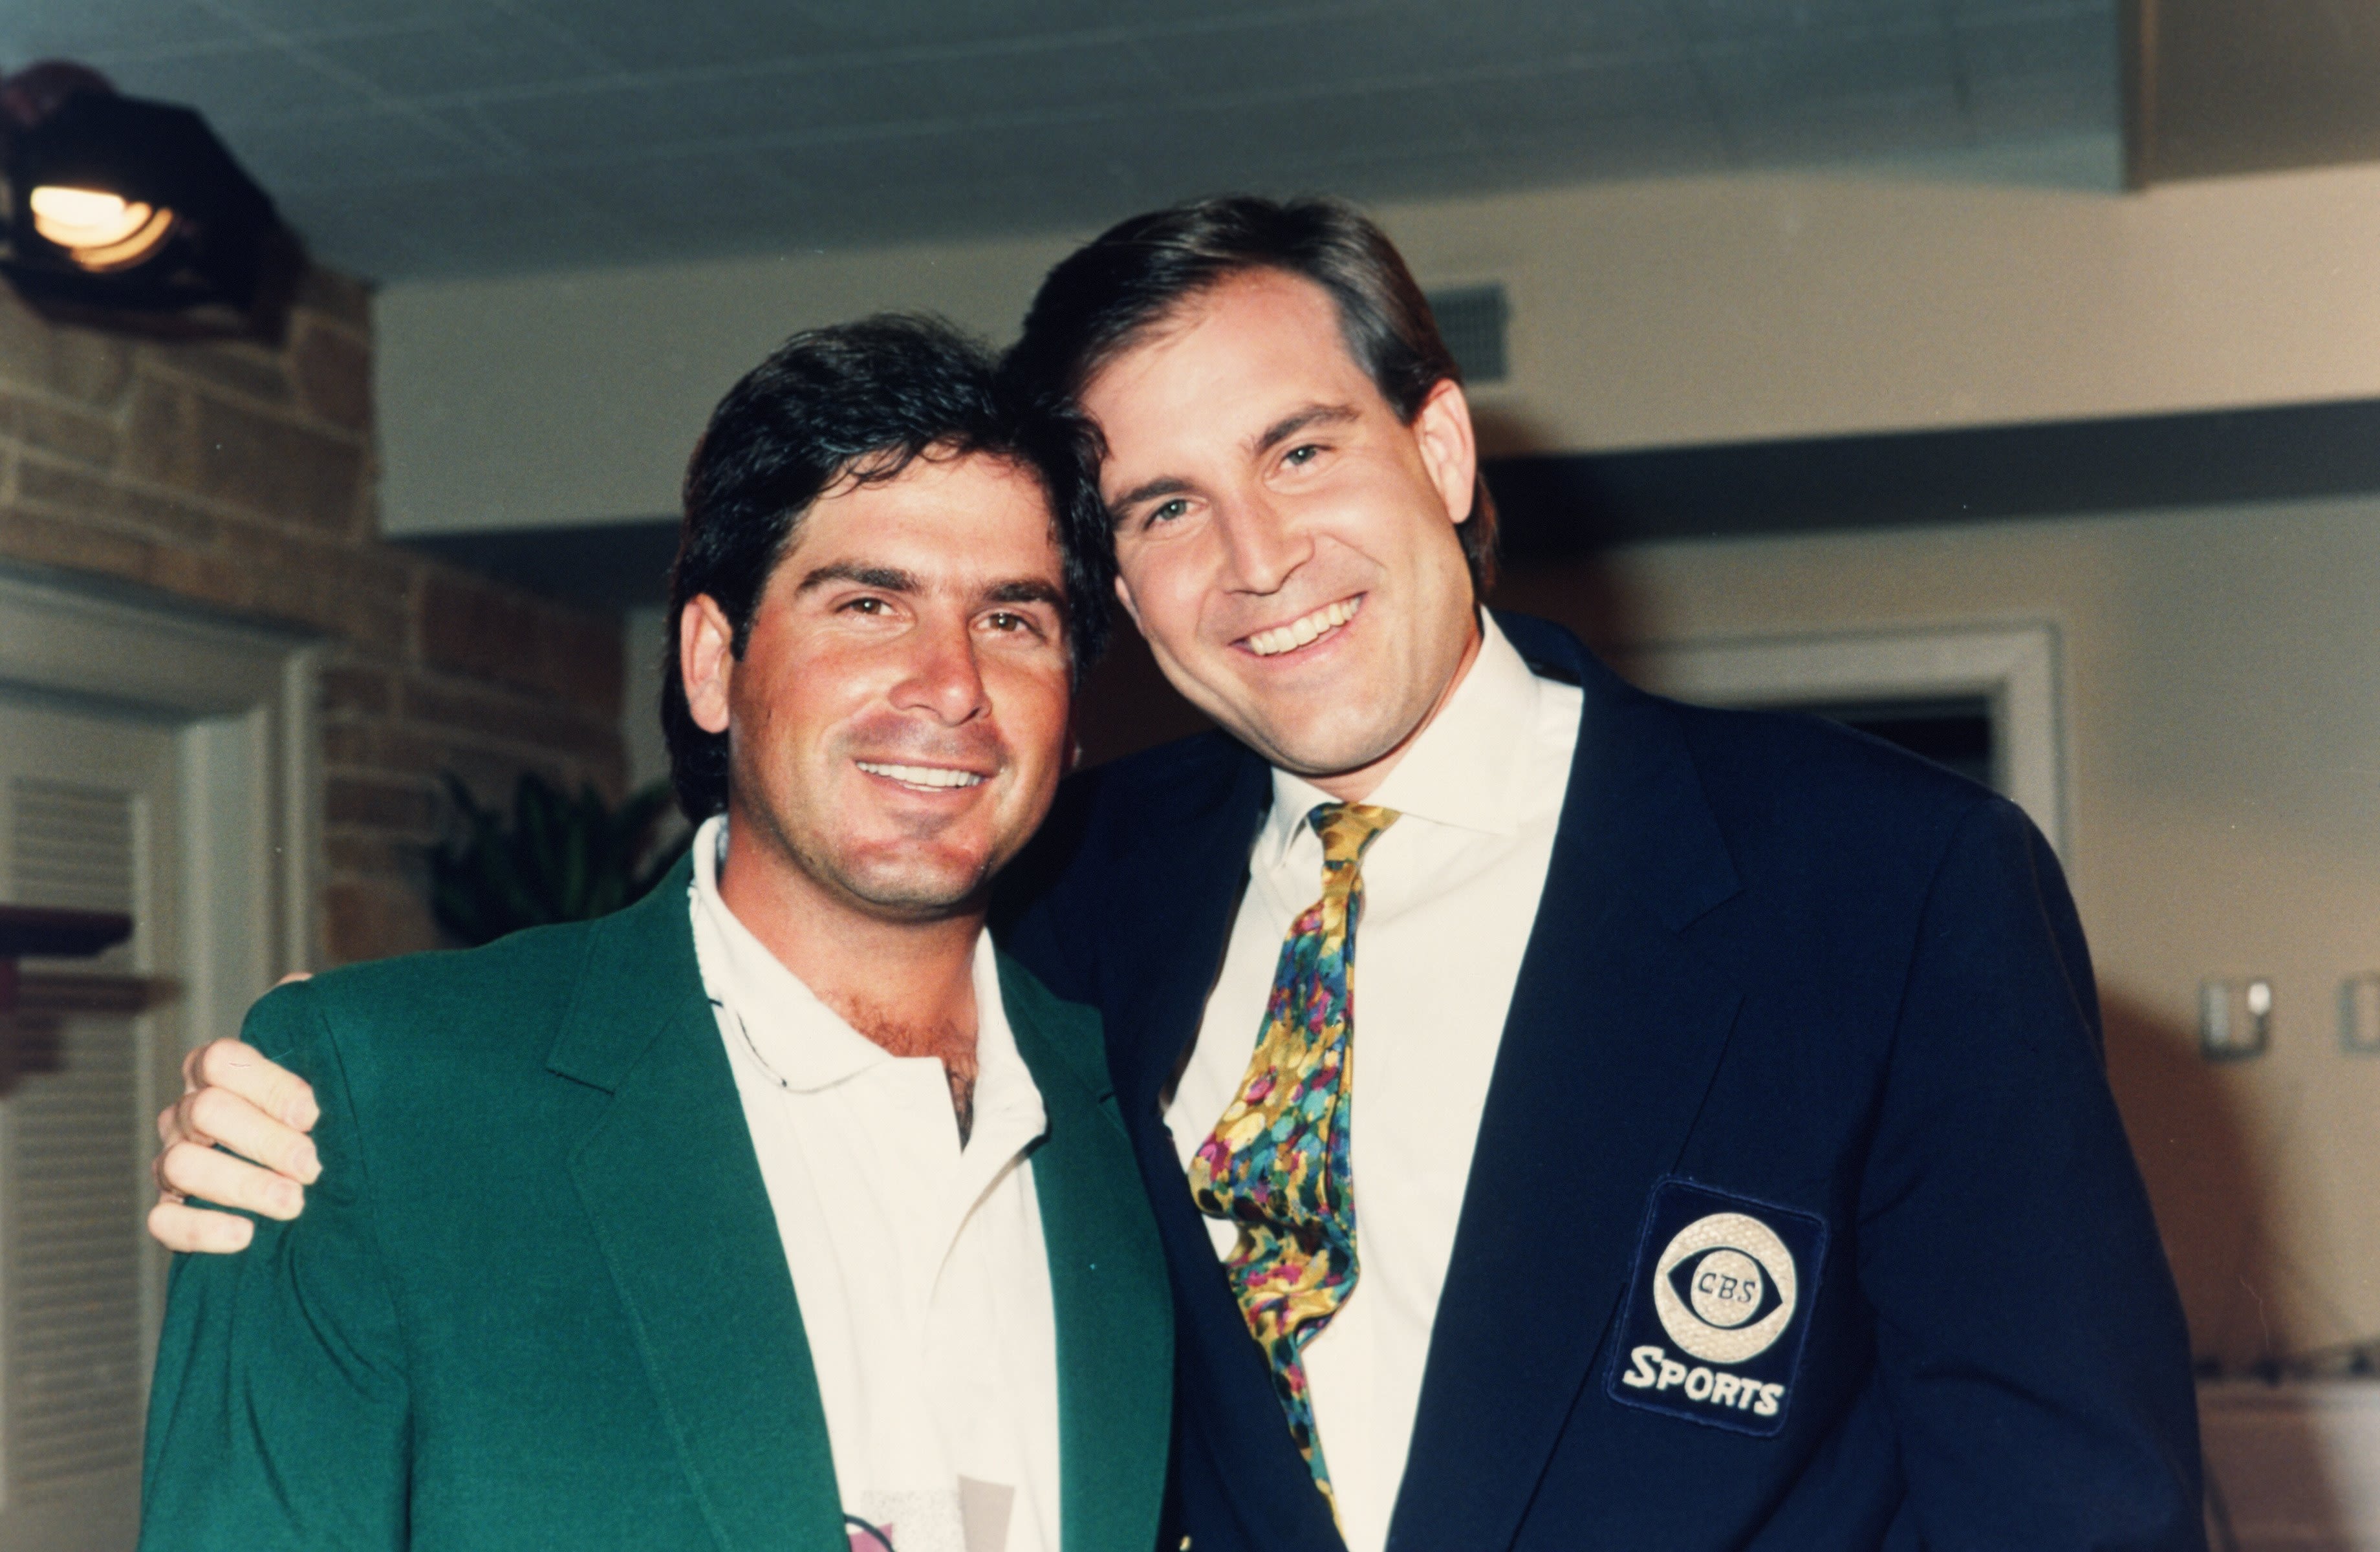 Nantz with friend, Fred Couples, after his Masters win.